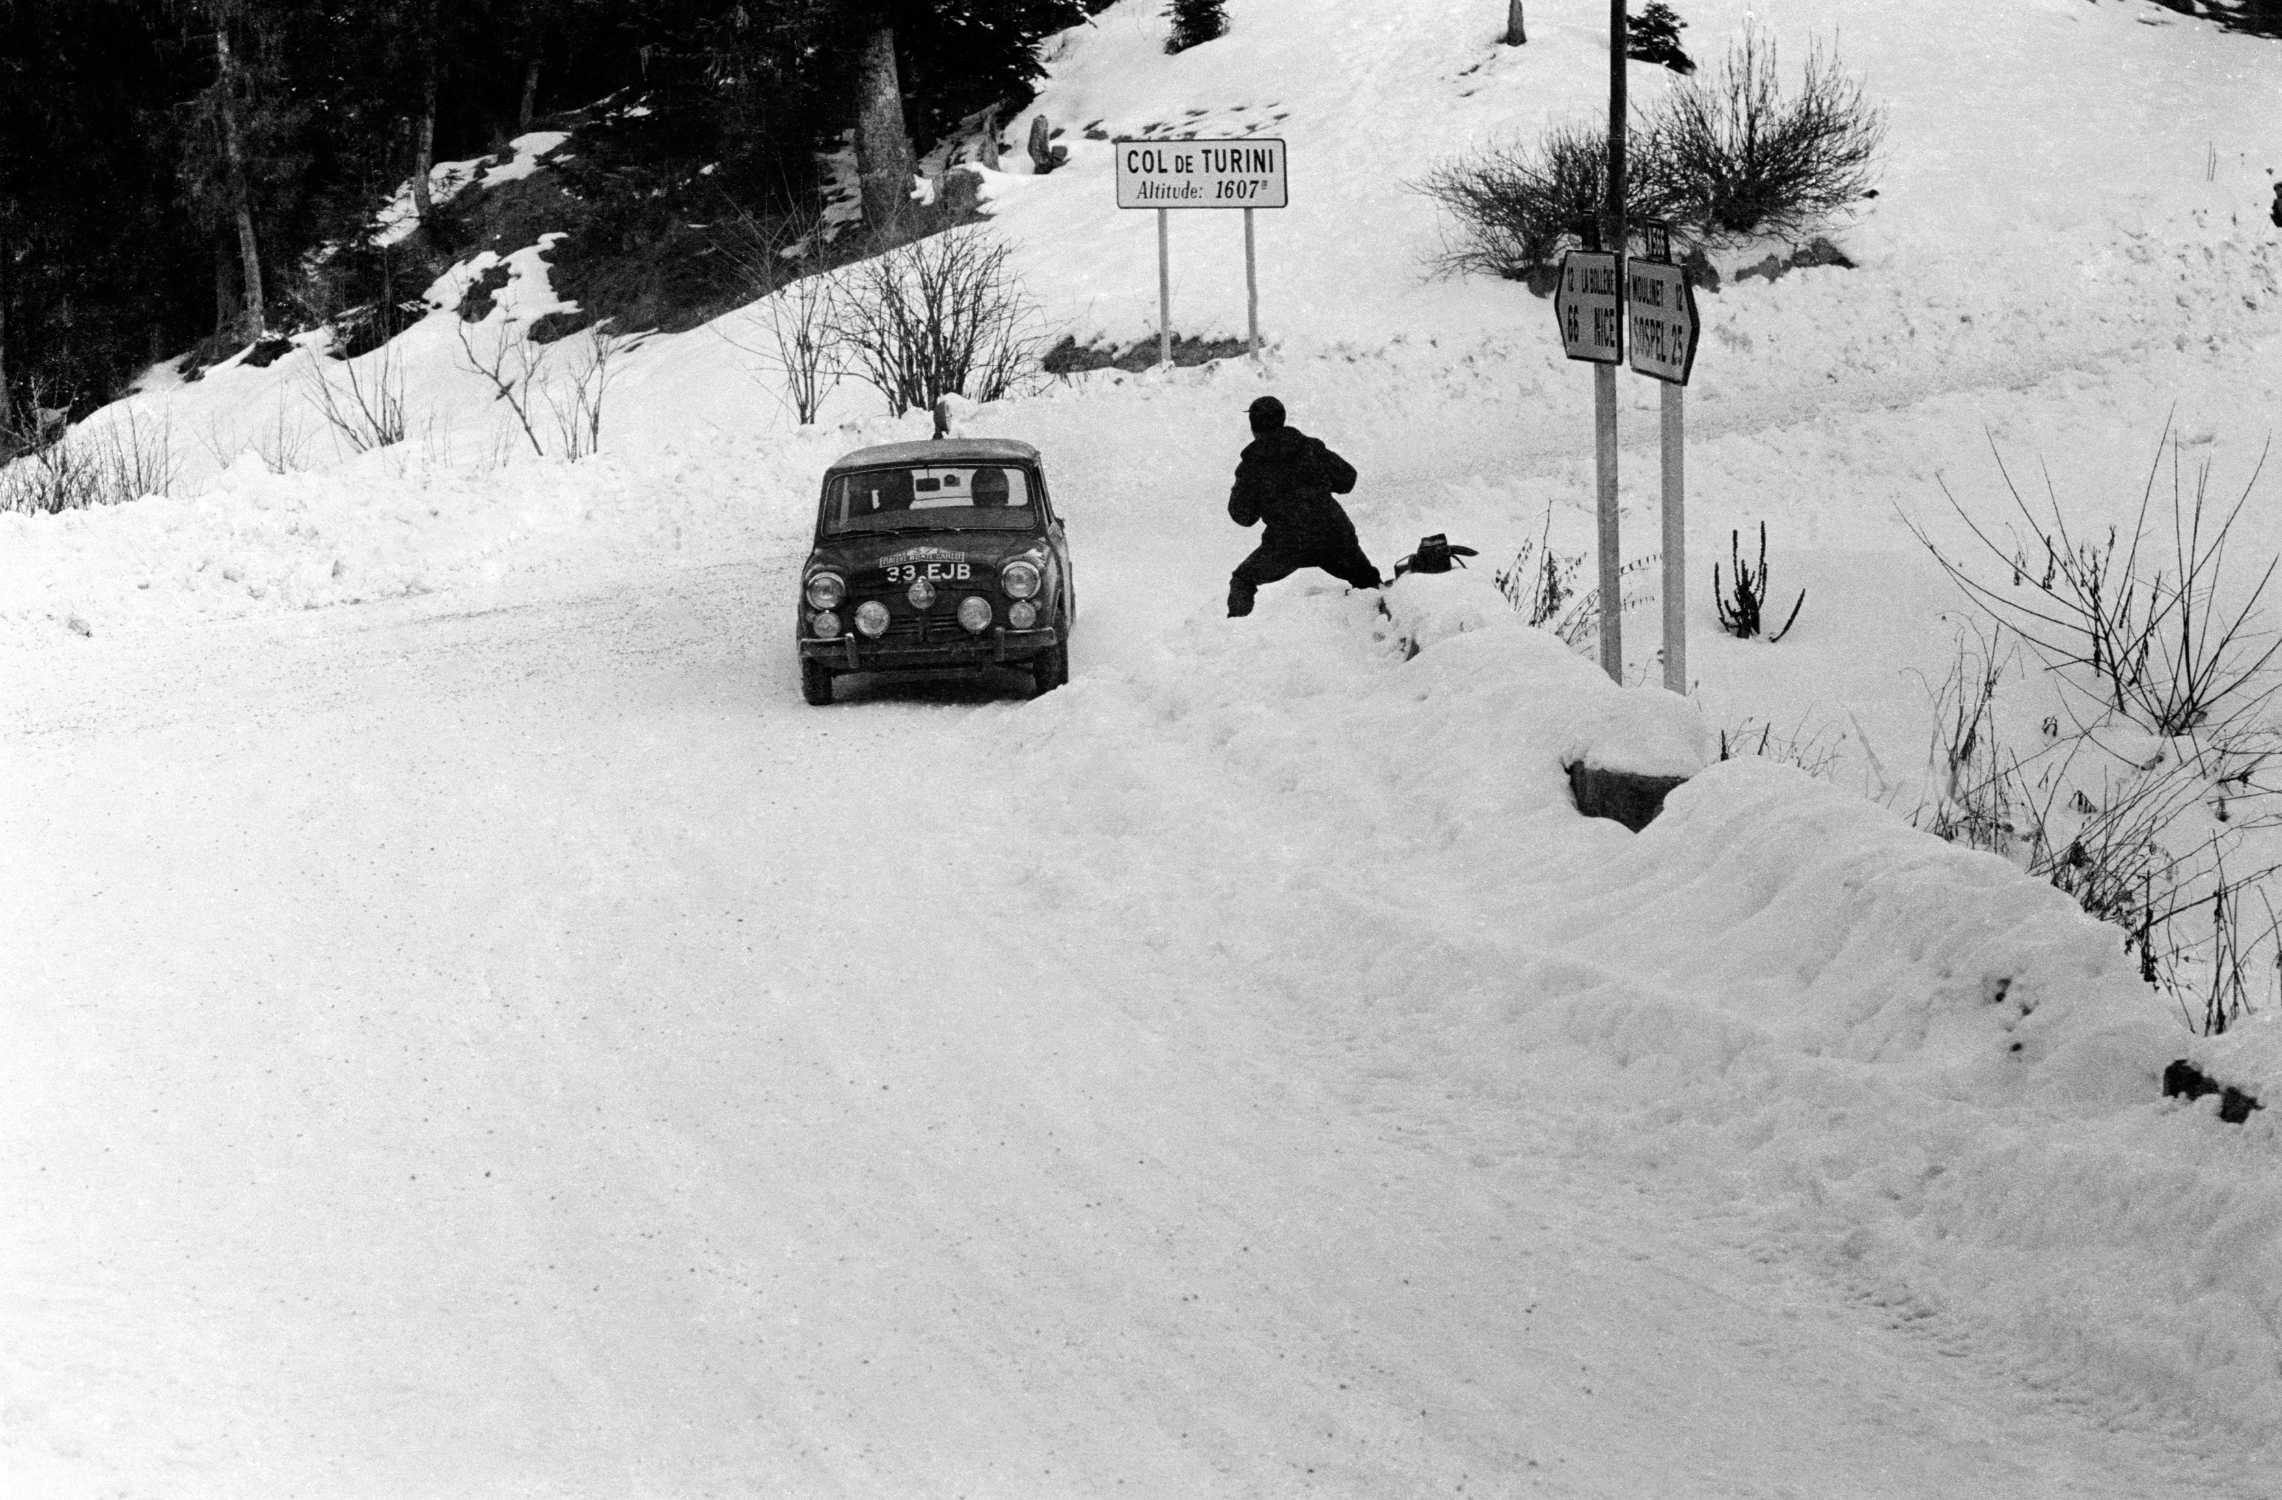 Paddy Hopkirk Mini in snow racing action